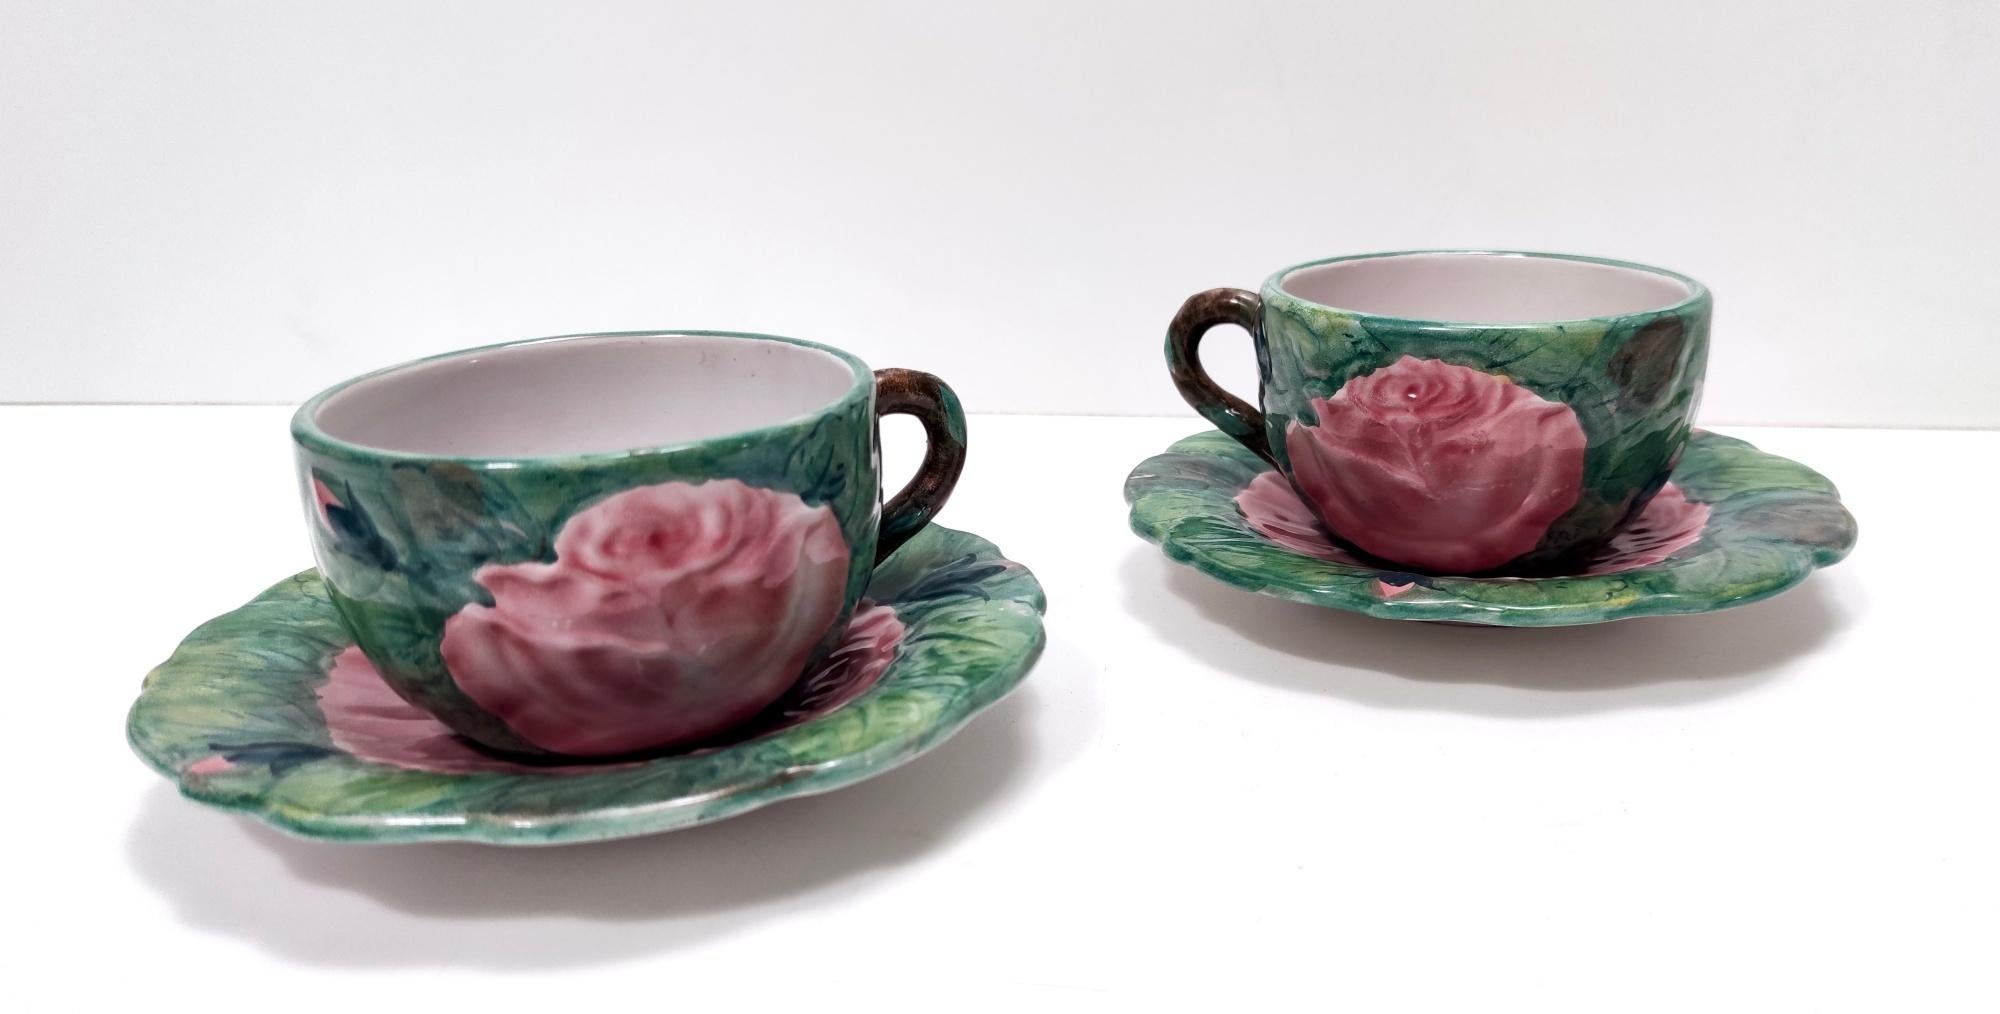 Pair of Vintage Earthenware Tea /Coffee Cups with Floral Motifs by Zaccagnini For Sale 12